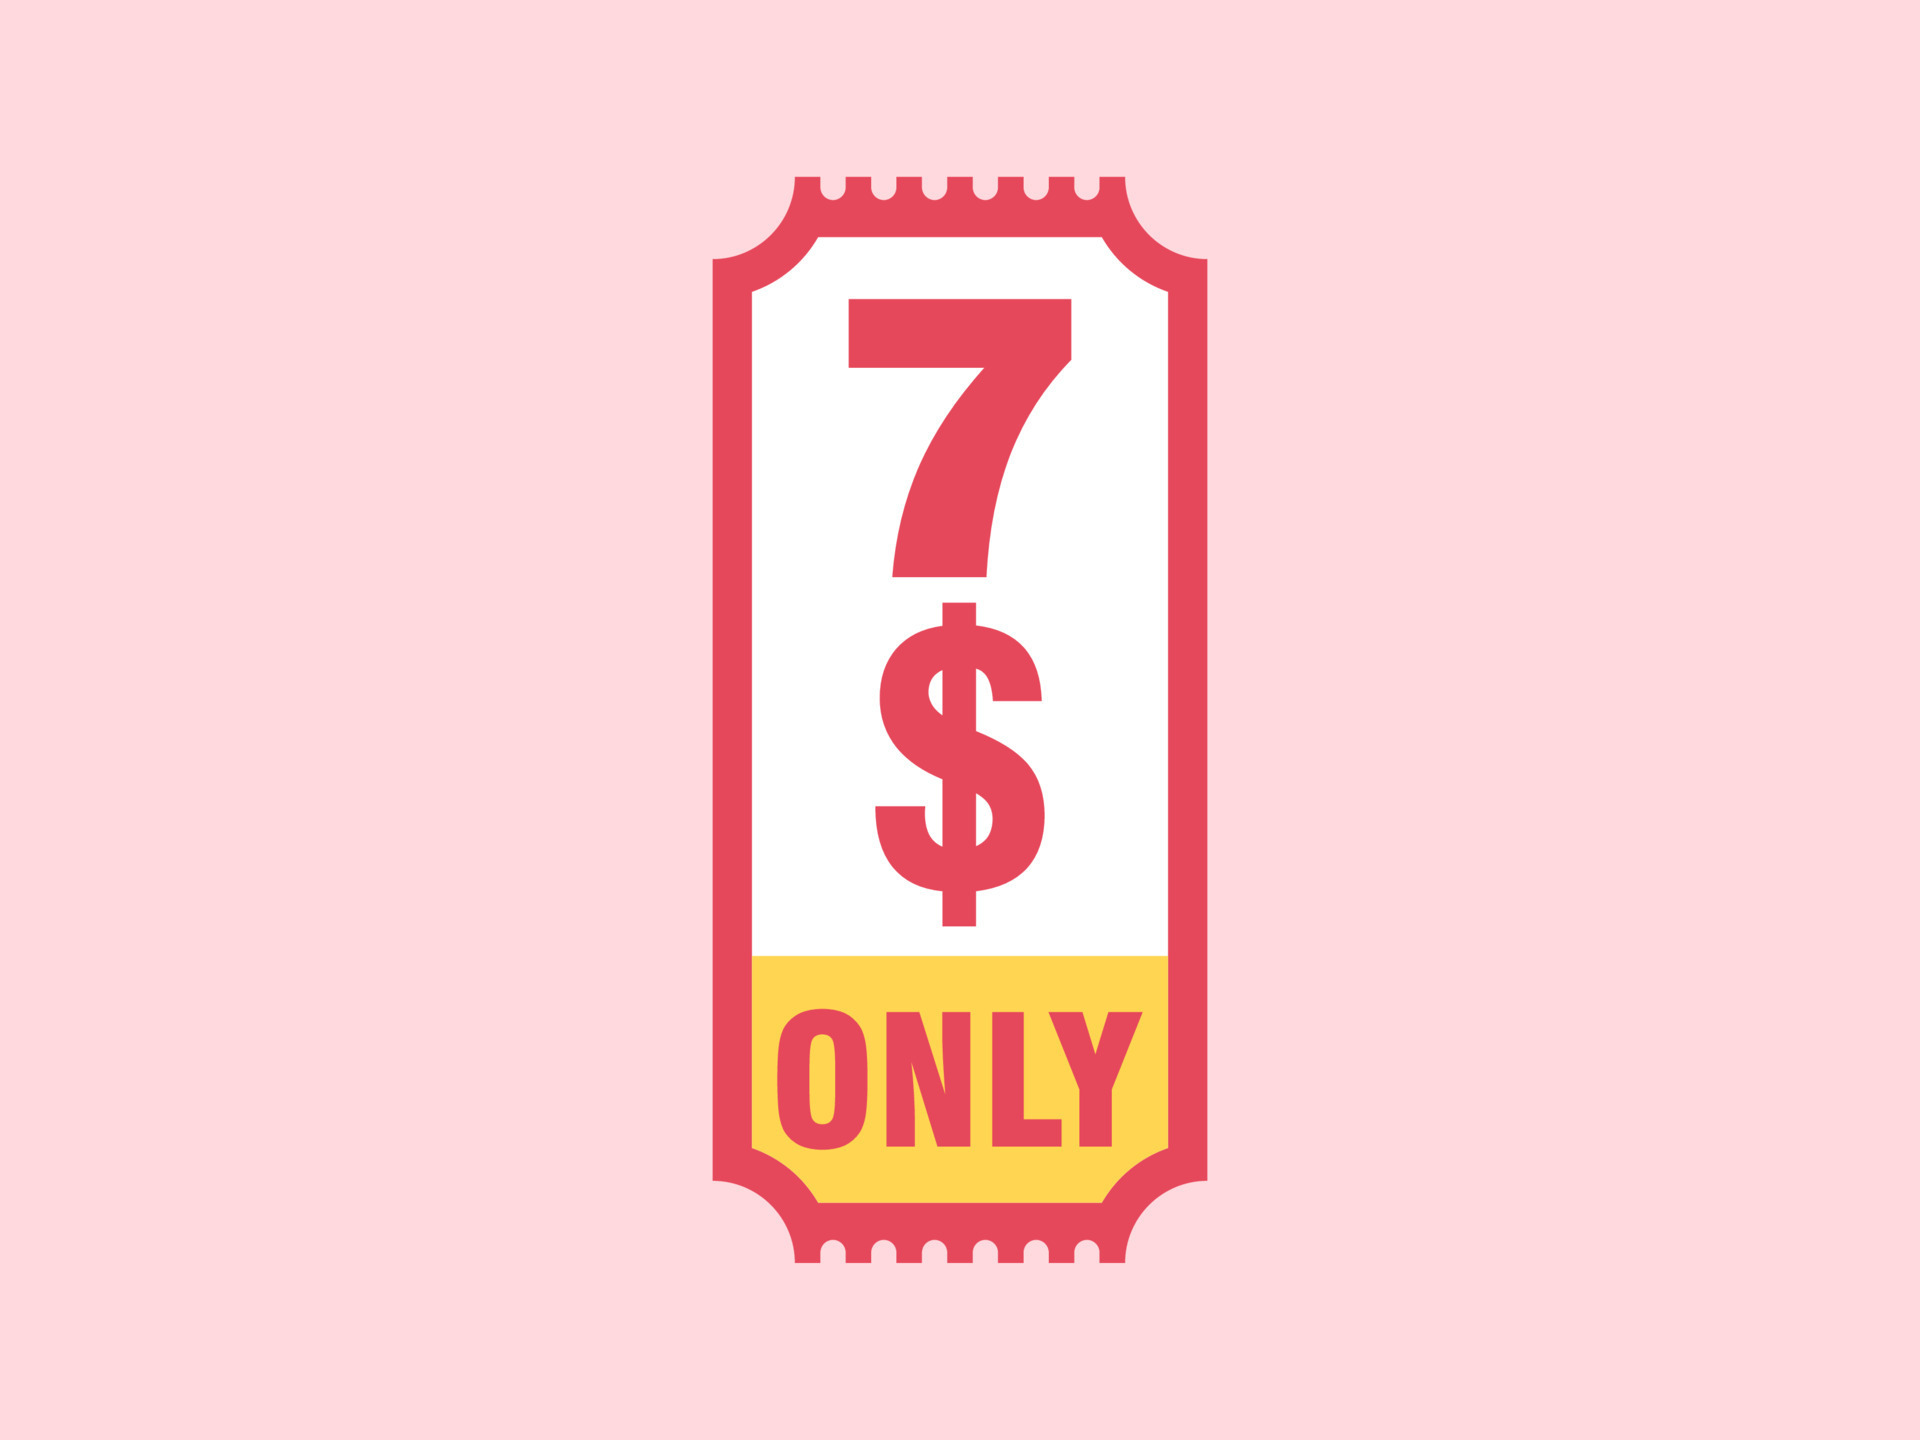 https://static.vecteezy.com/system/resources/previews/012/463/974/original/7-dollar-only-coupon-sign-or-label-or-discount-voucher-money-saving-label-with-coupon-illustration-summer-offer-ends-weekend-holiday-free-vector.jpg